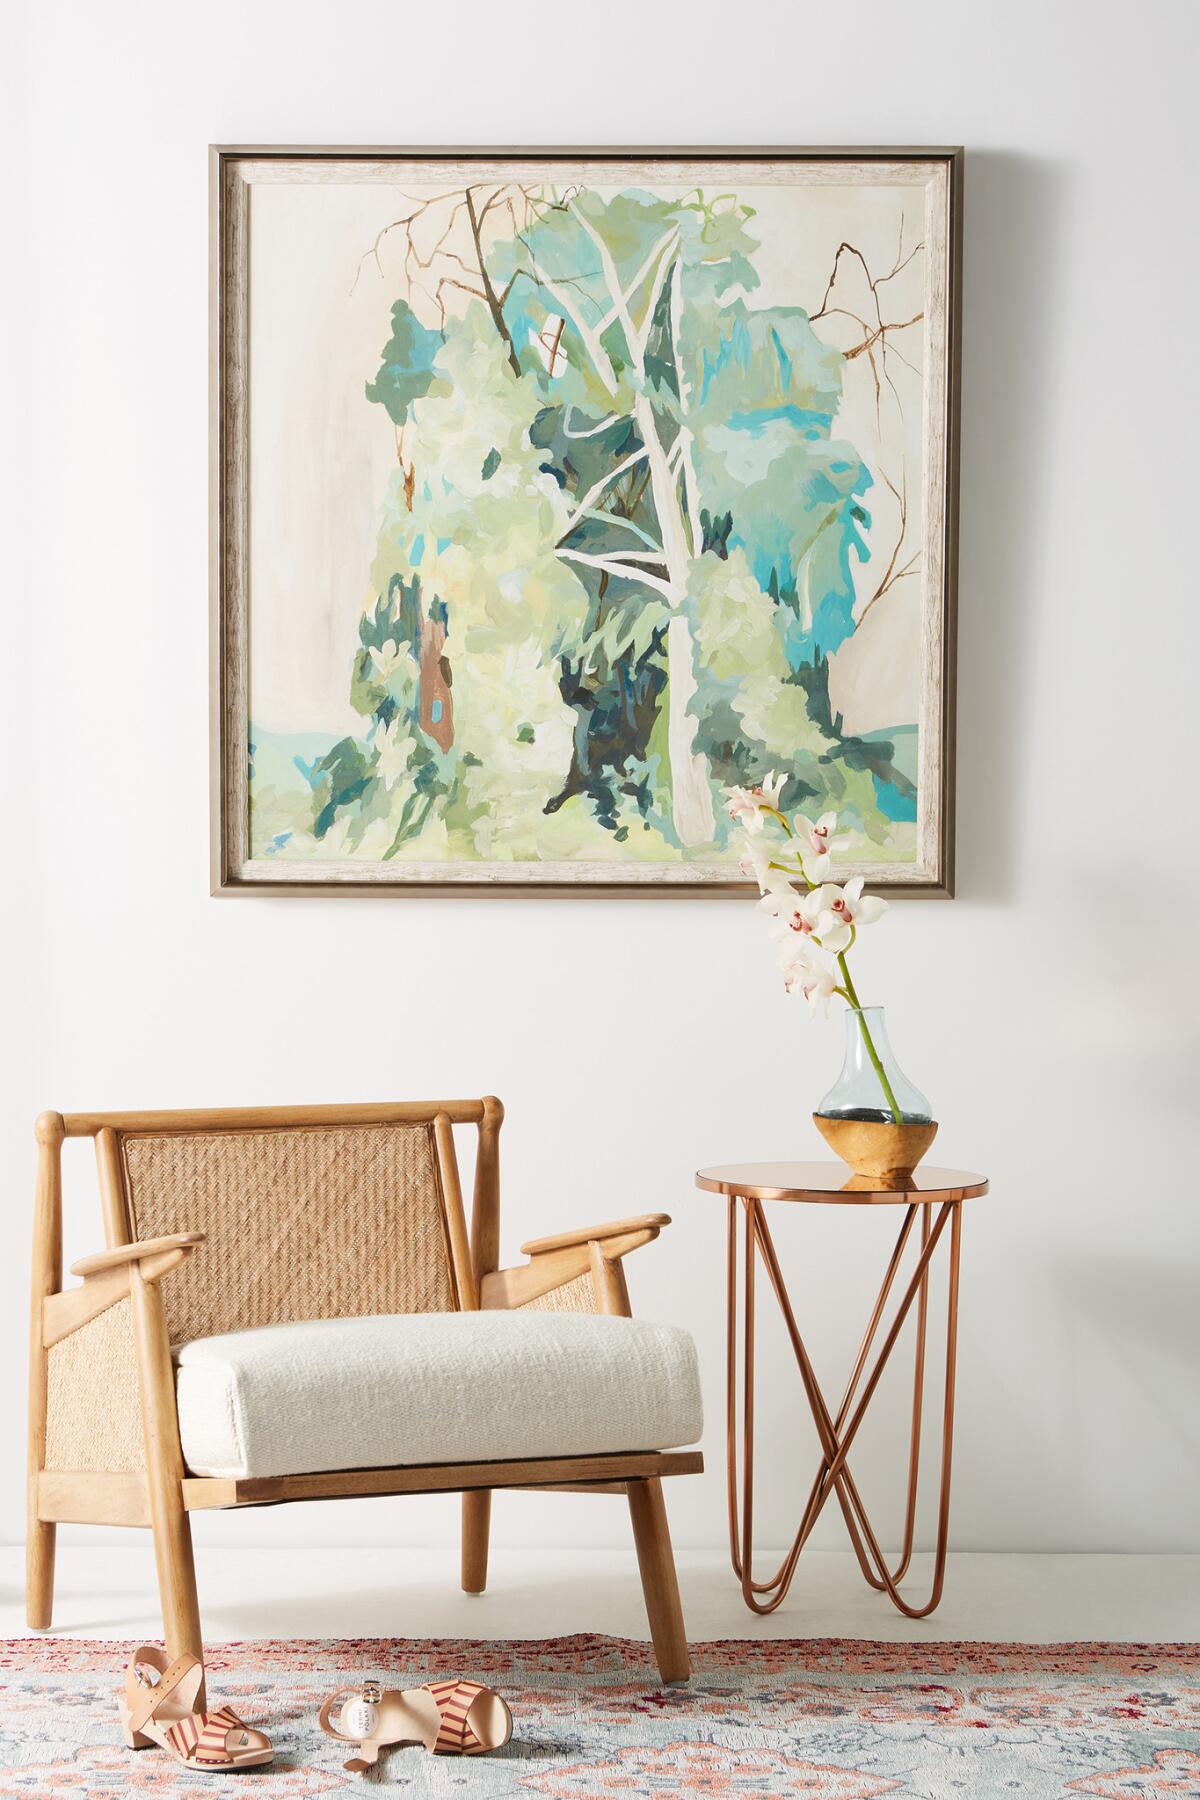 Meditative colors, rattan and natural fibers define a spa-like retreat. Messy Thicket Wall Art, $598 by Sara Brown at Anthropologie.